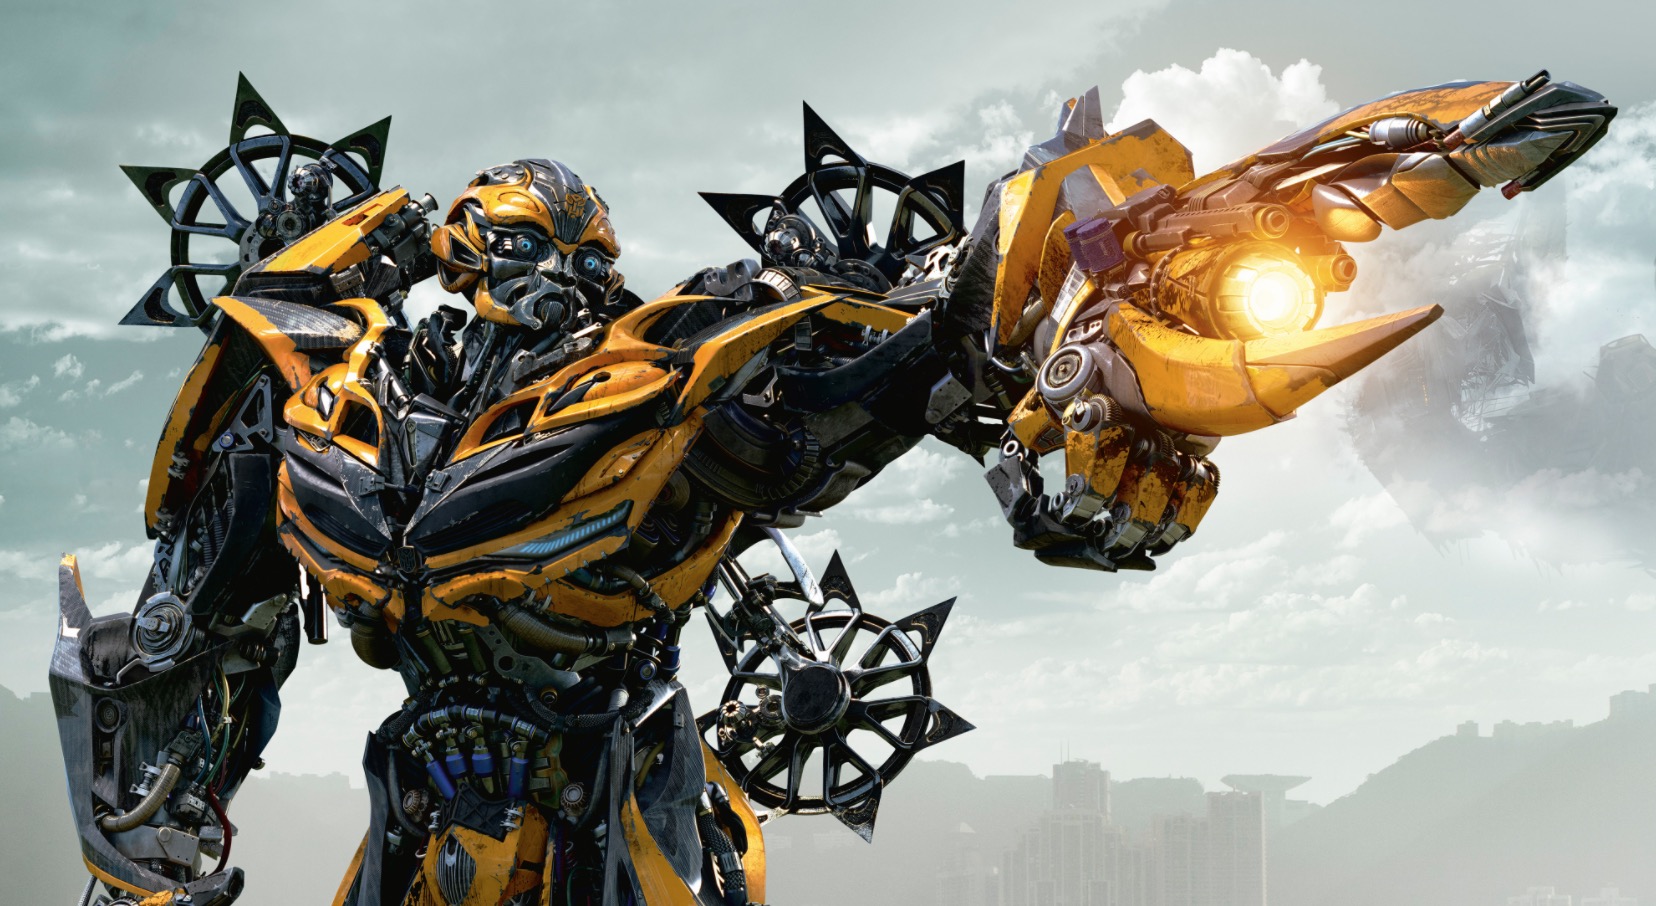 Updates On All Of Transformers’ Sequels, Spin-Offs, Animated Films And Crossovers